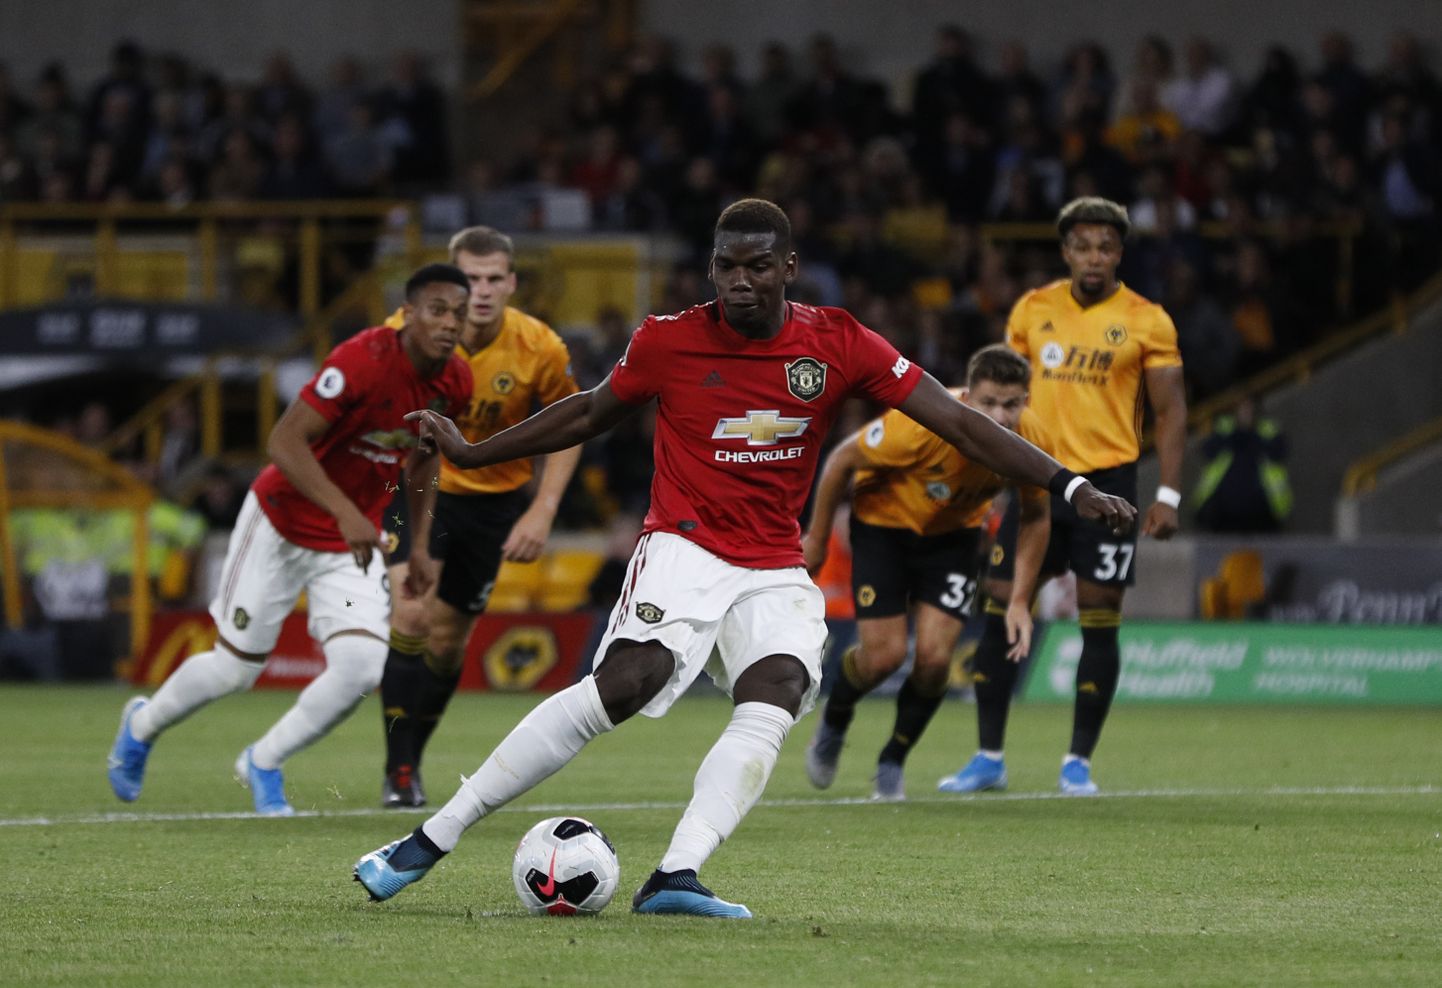 Paul Pogba of Manchester United takes a penalty kick which is saved  during the Premier League match at Molineux, Wolverhampton. Picture date: 19th August 2019. Picture credit should read: Darren Staples/Sportimage via PA Images